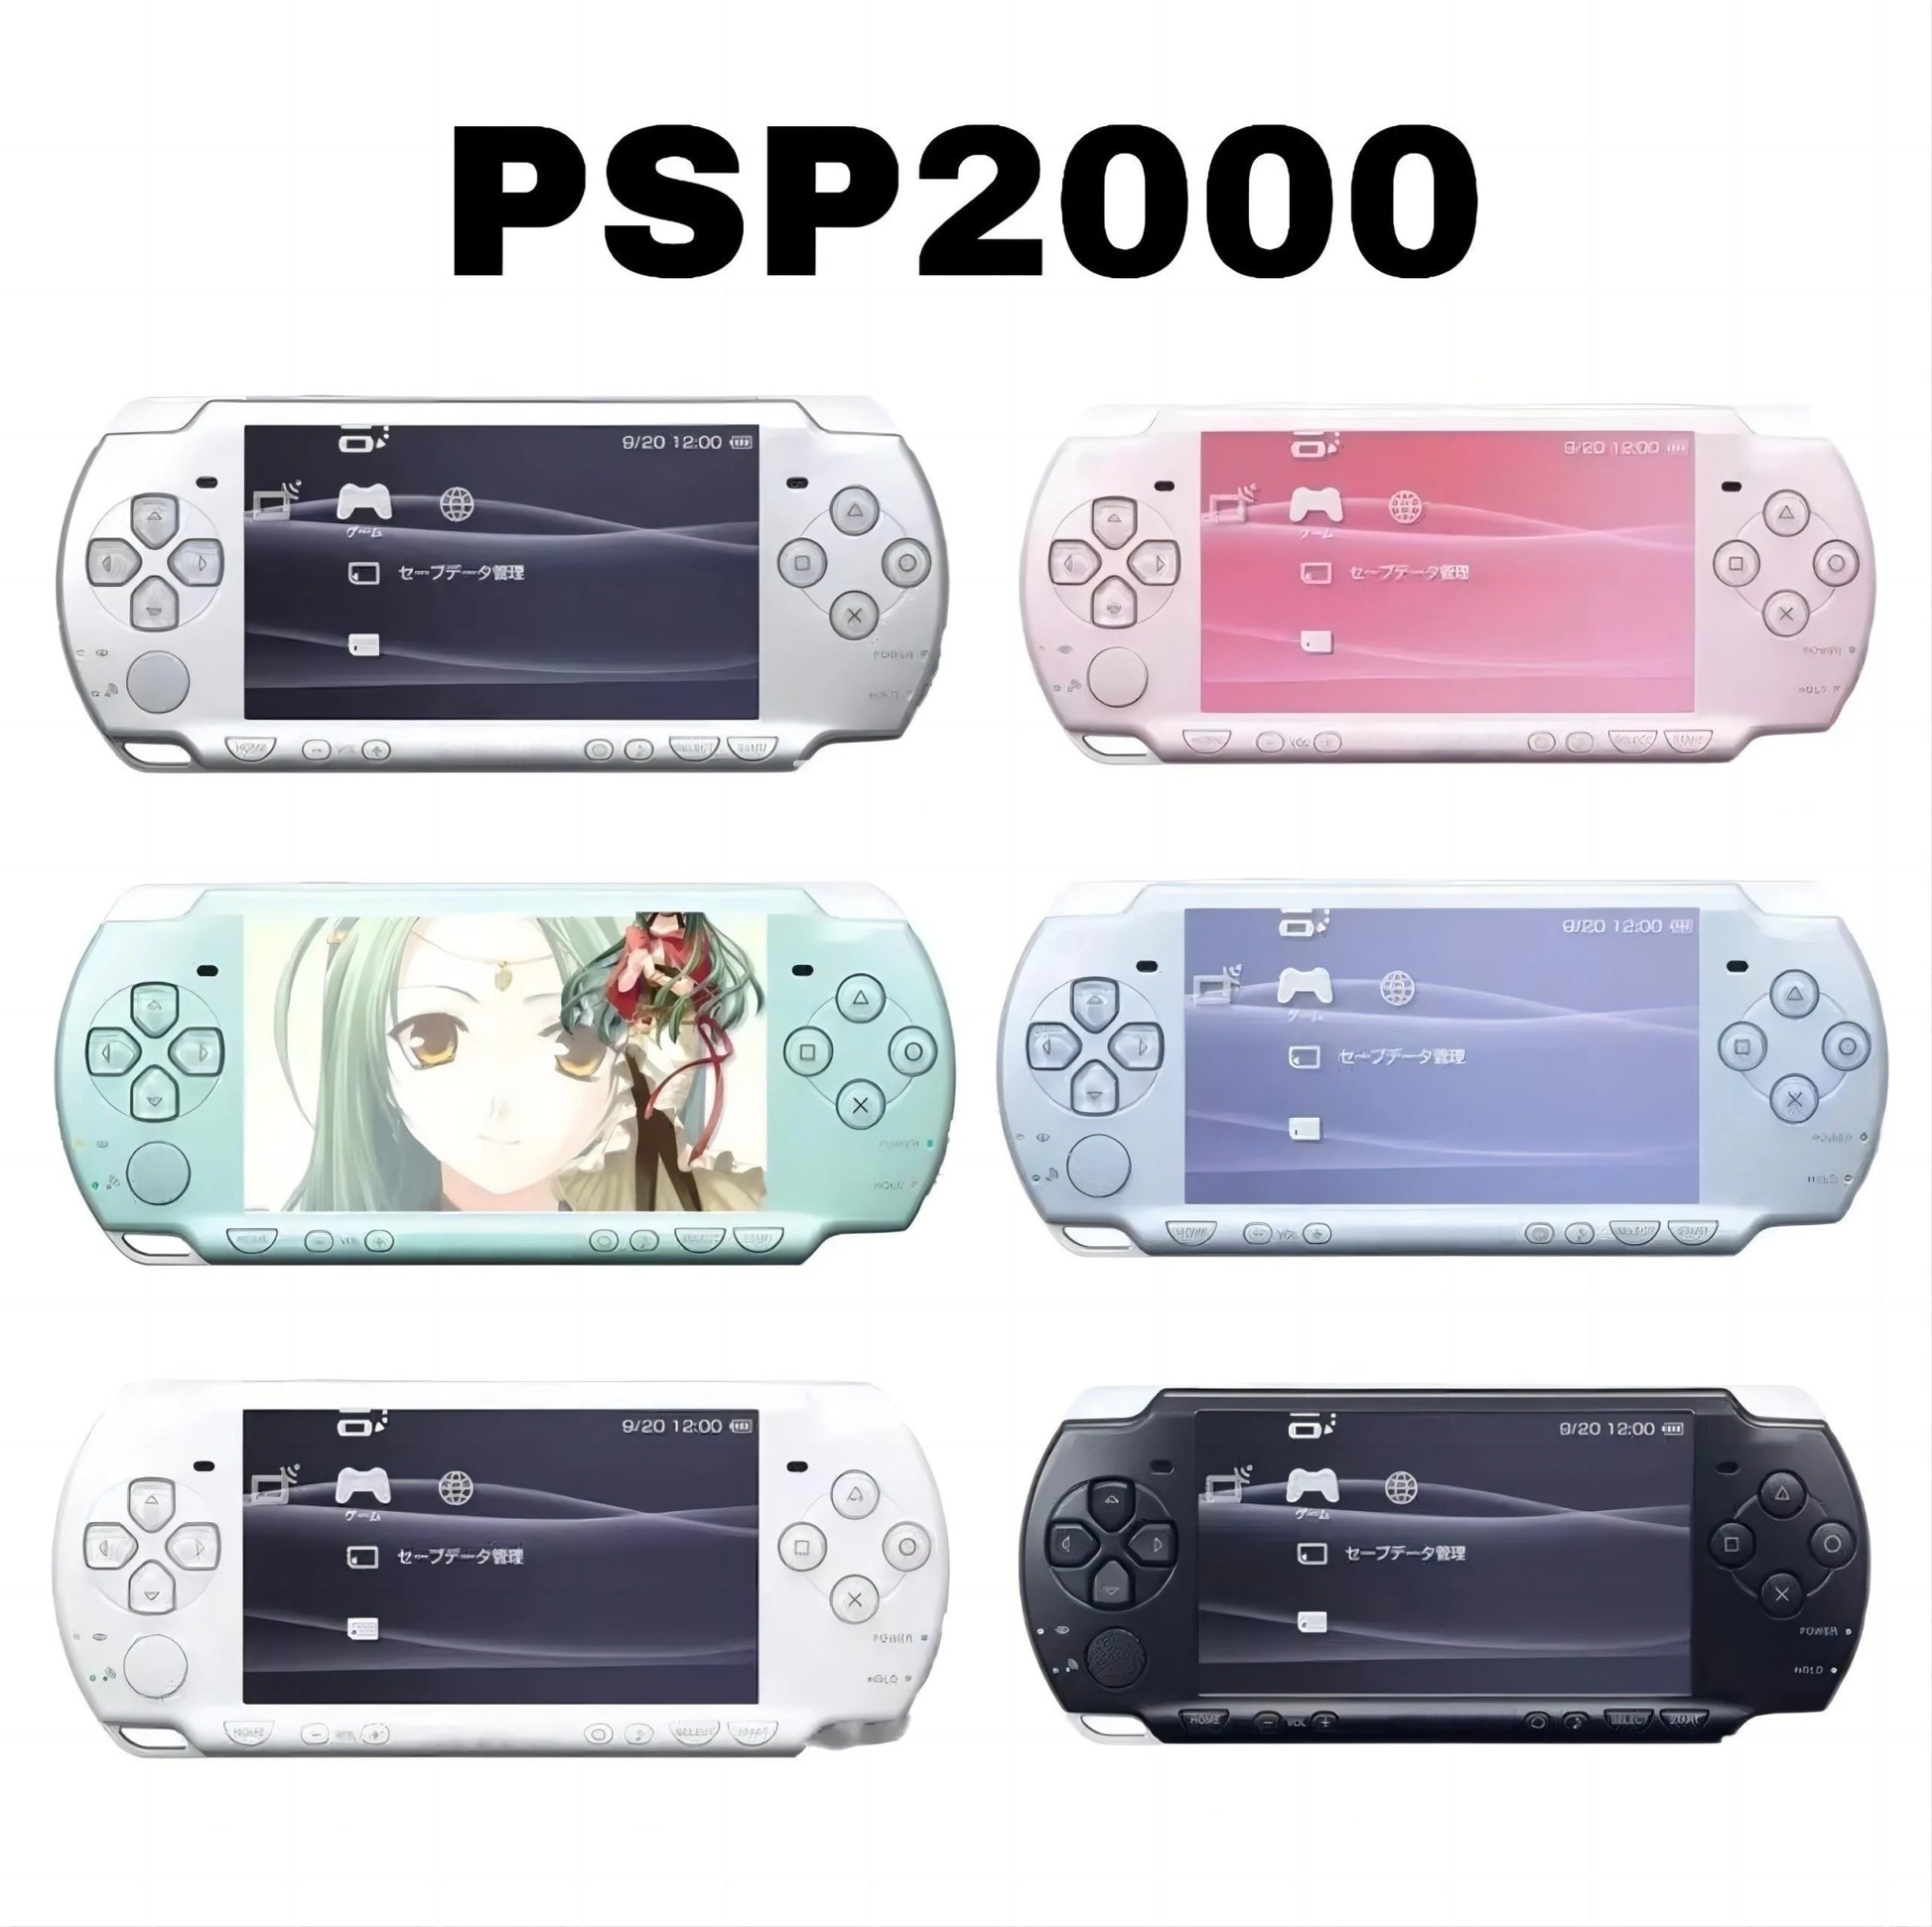 Original PSP 1000 2000 psp 3000 game console 32GB memory card includes free games, pre installed games, and ready to play - OnlineshopLand